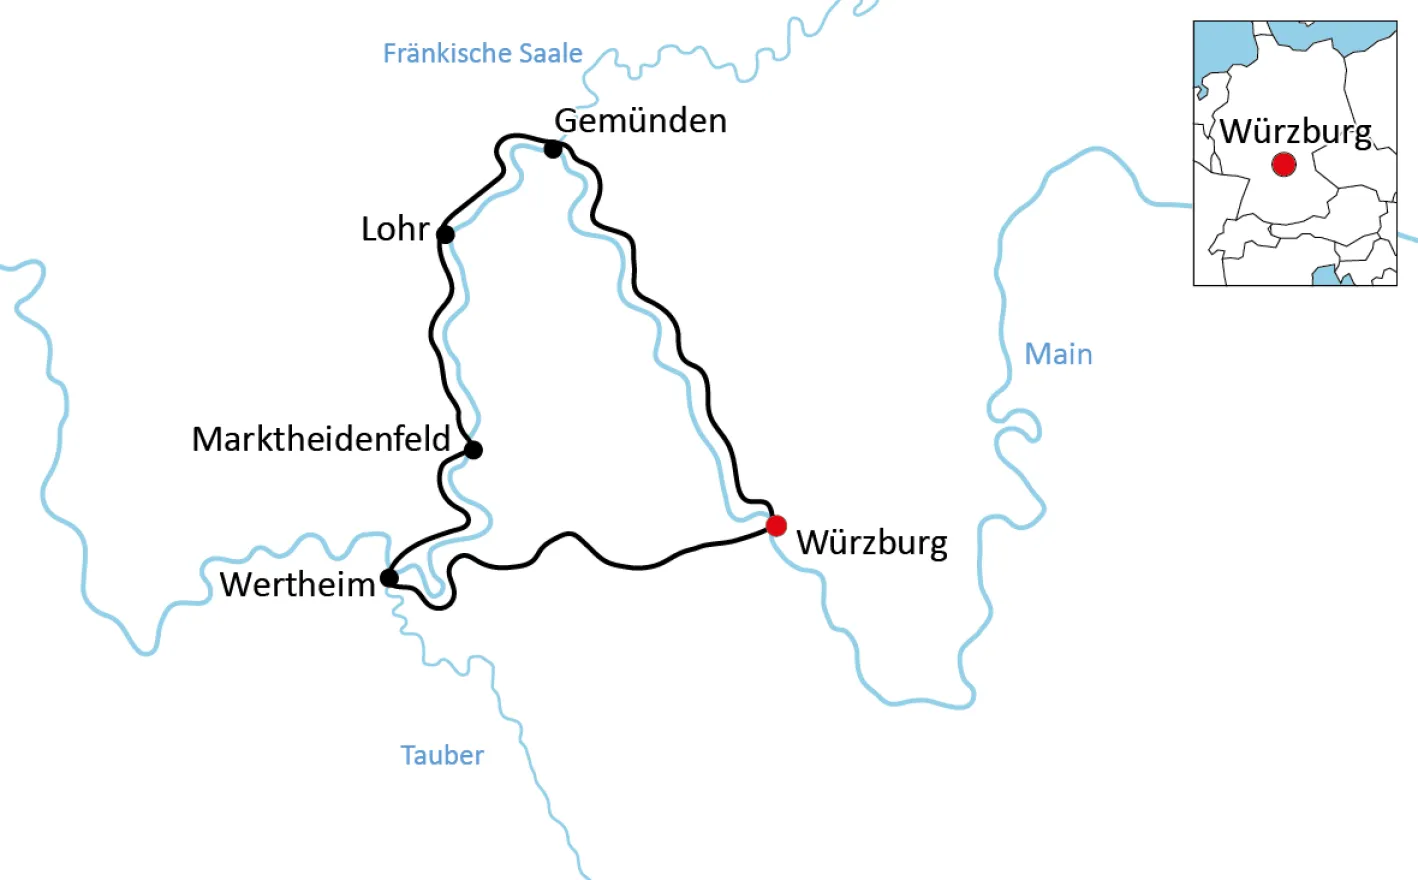 Map for the short bike tour along the Spessart and Main rivers